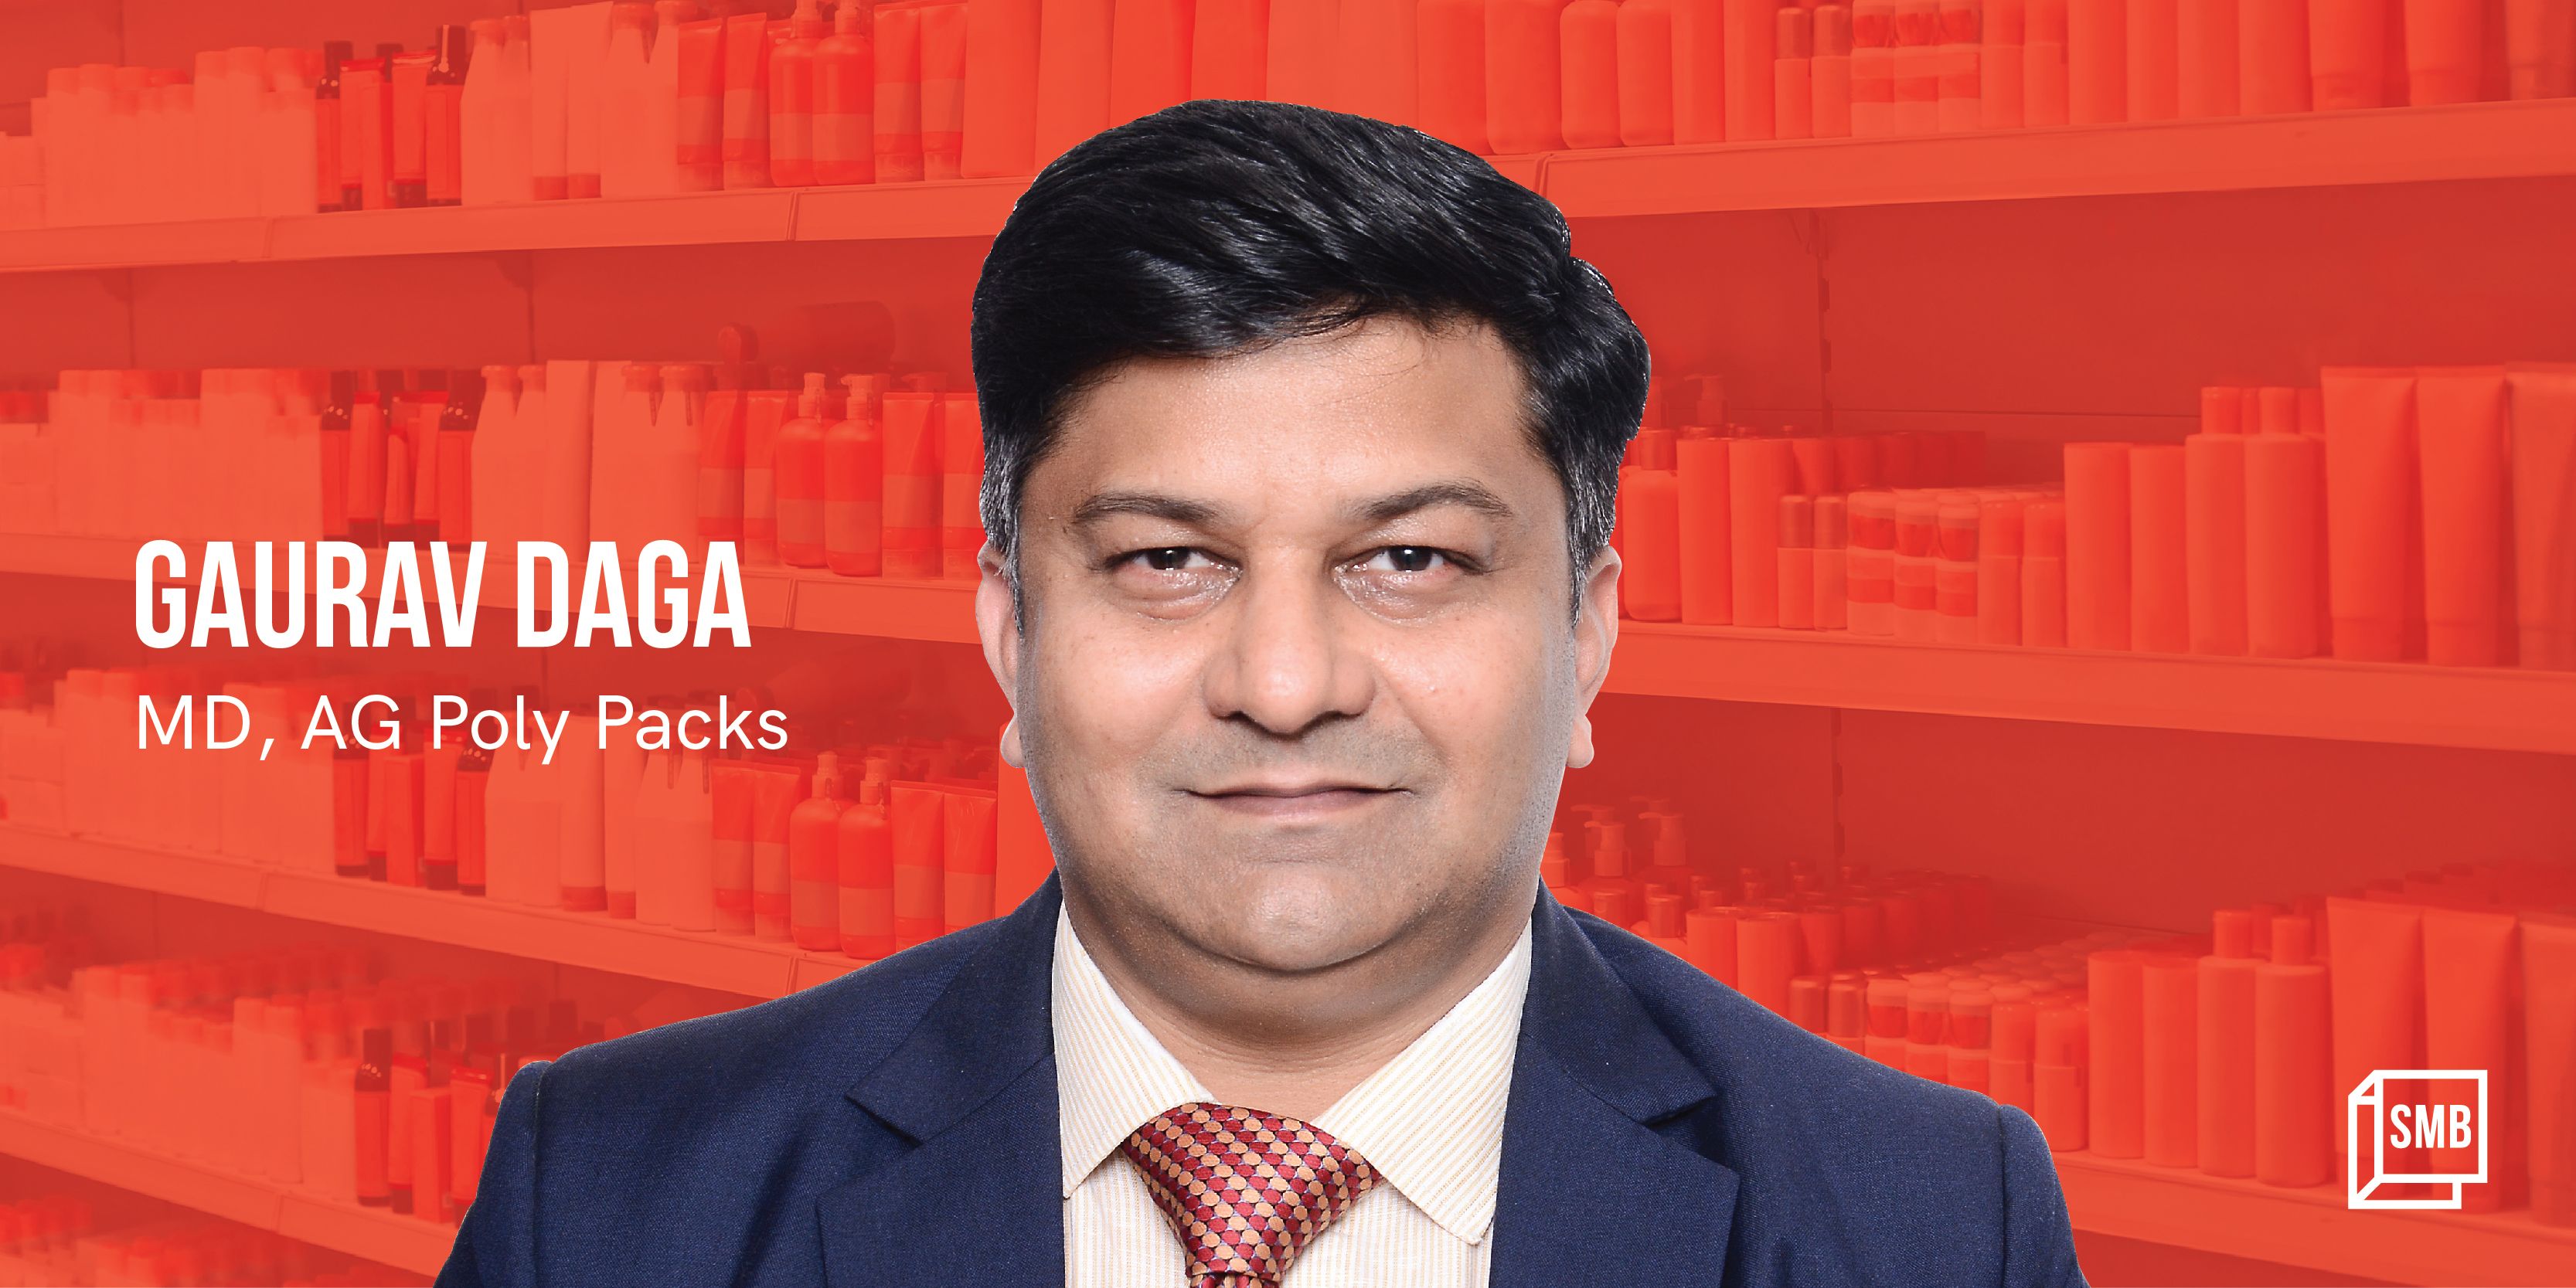 Meet the man who built a Rs 158 crore packaging business that supplies to Patanjali, Mamaearth, and FabIndia